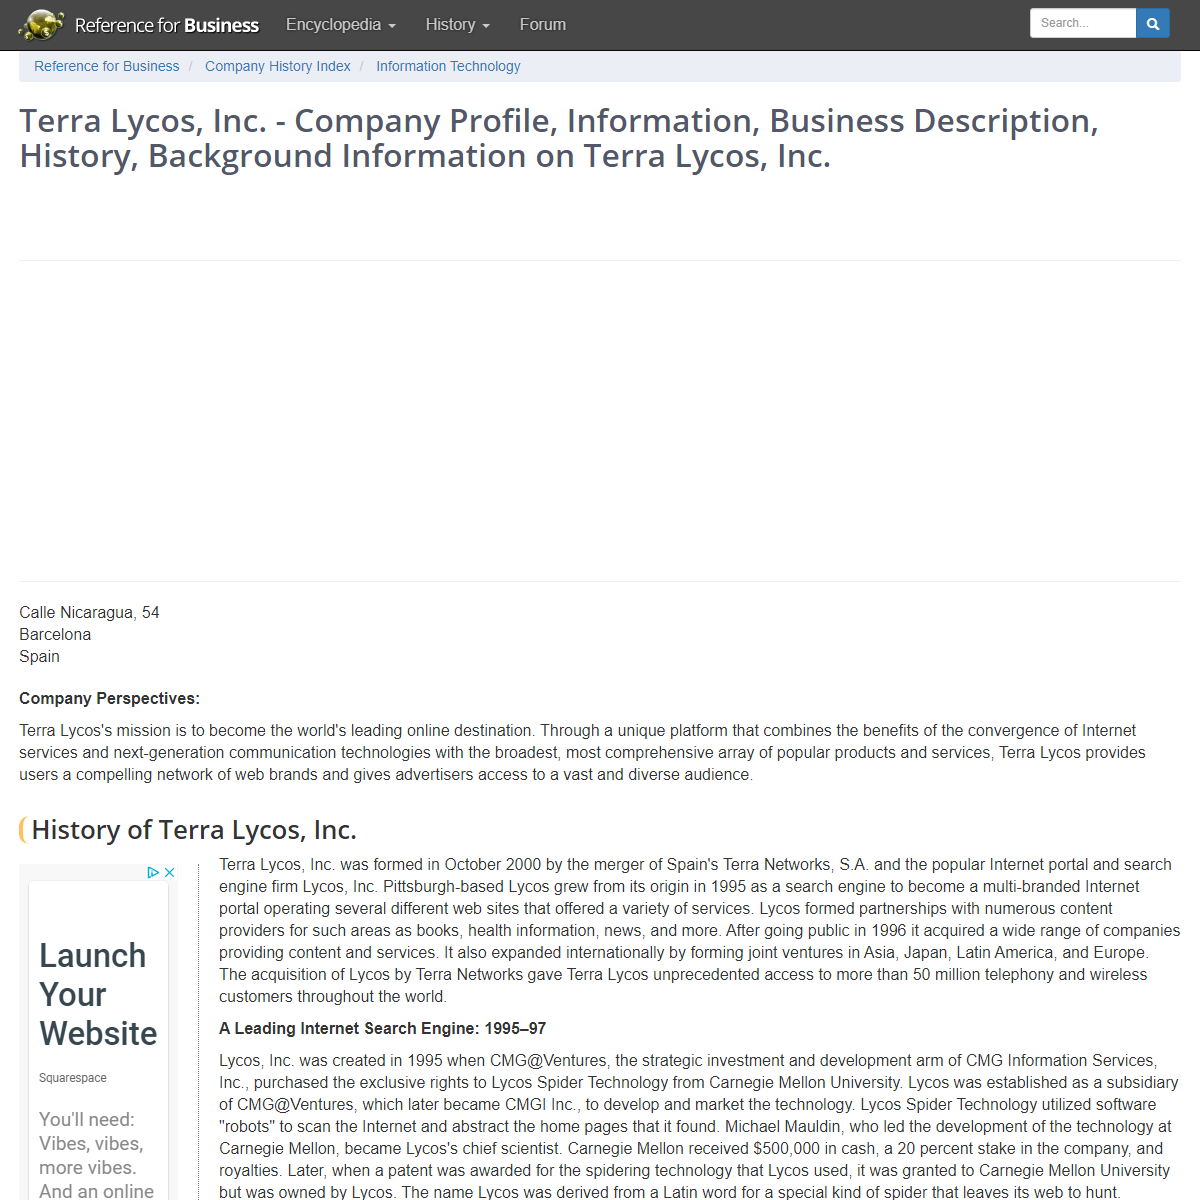 A complete backup of http://www.referenceforbusiness.com/history2/63/Terra-Lycos-Inc.html